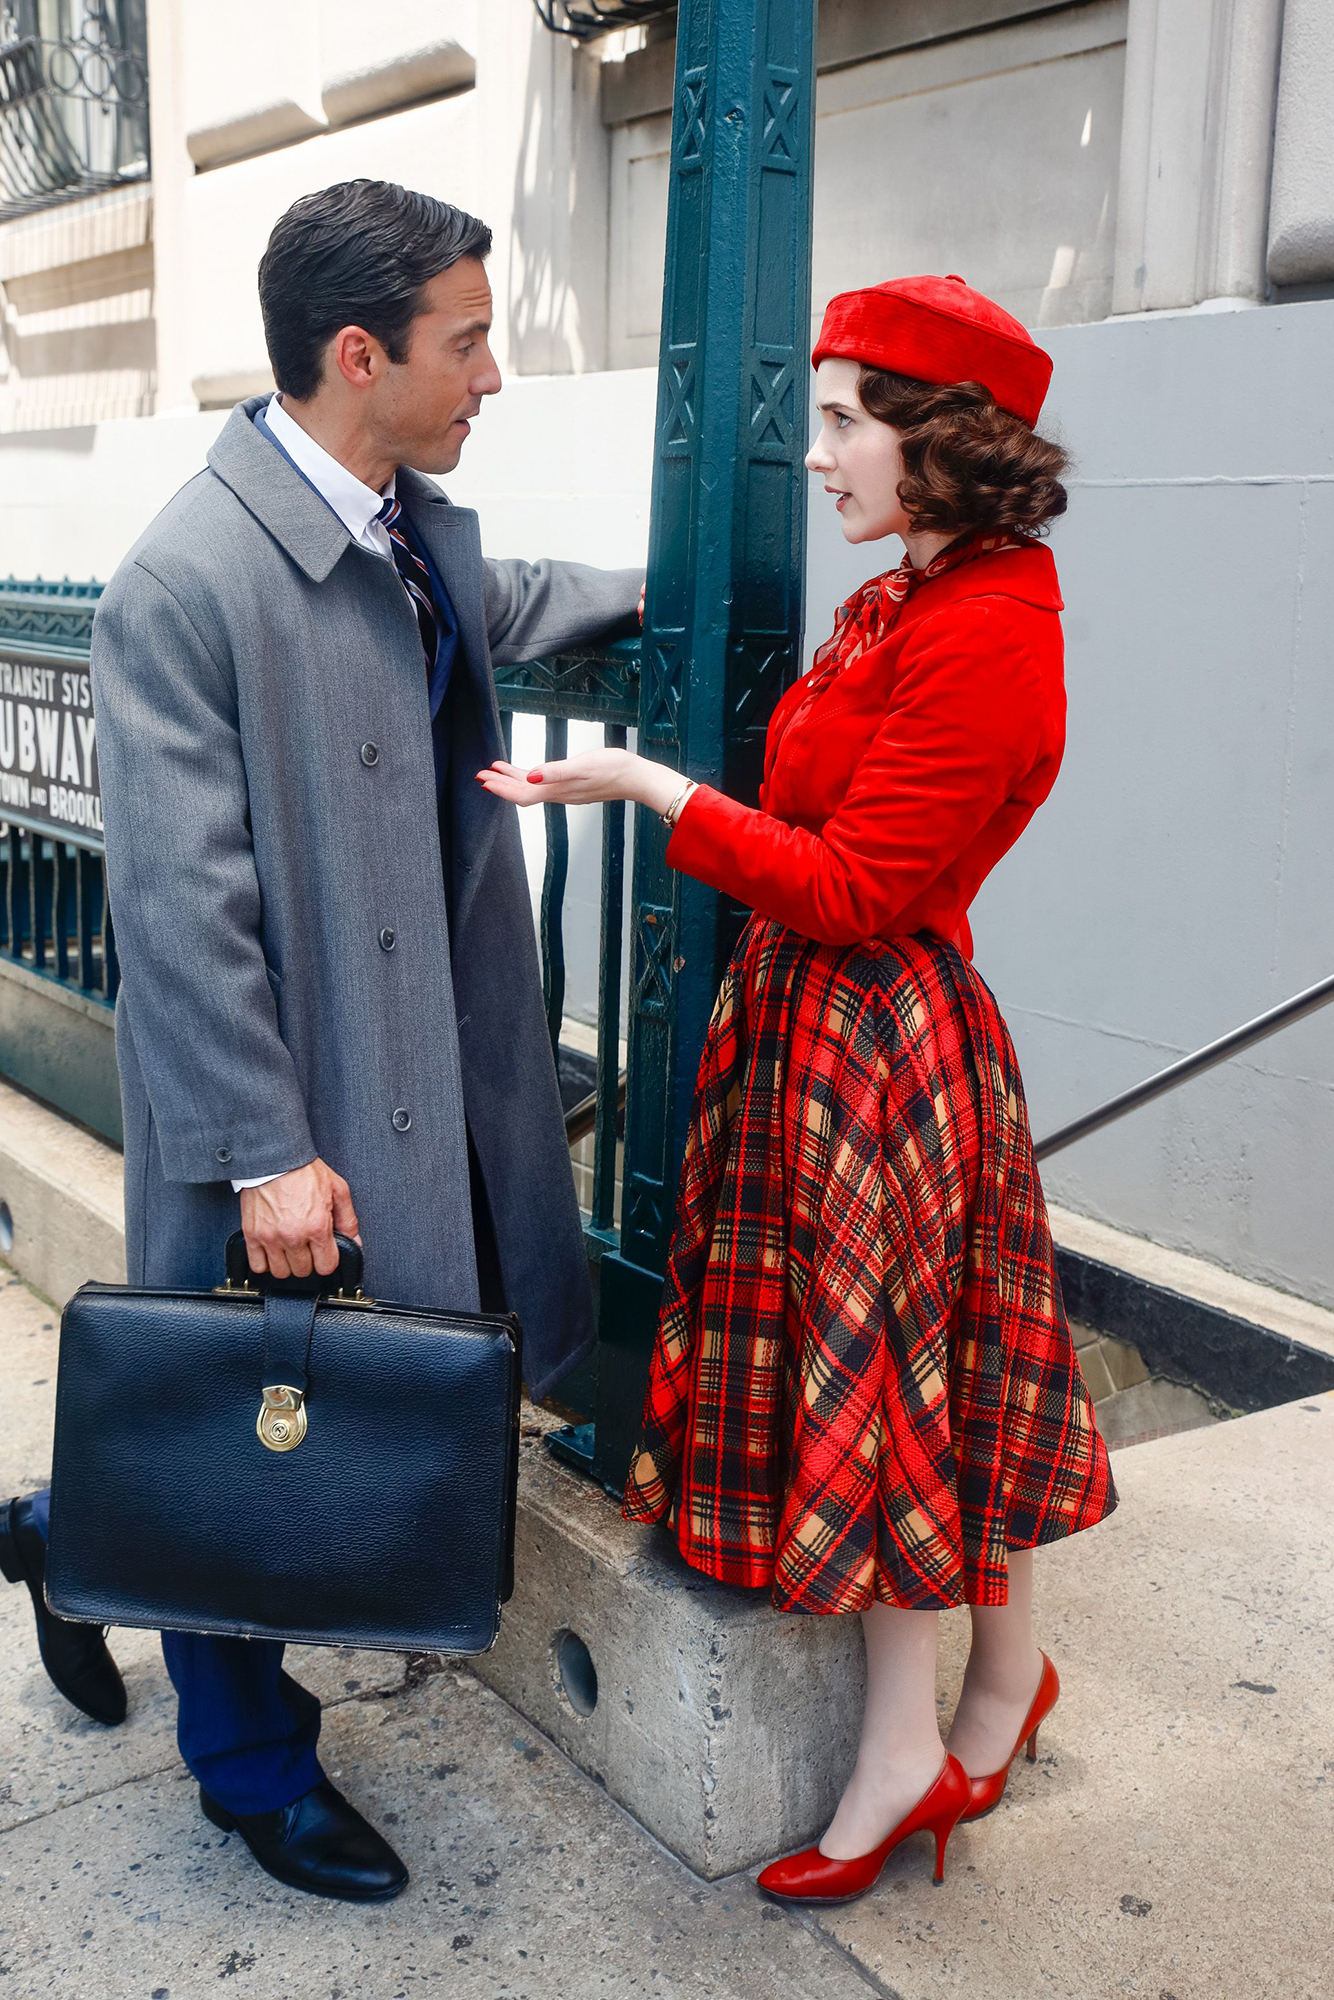 Milo’s Back! Everything to Know About ‘The Marvelous Mrs. Maisel’ Season 5